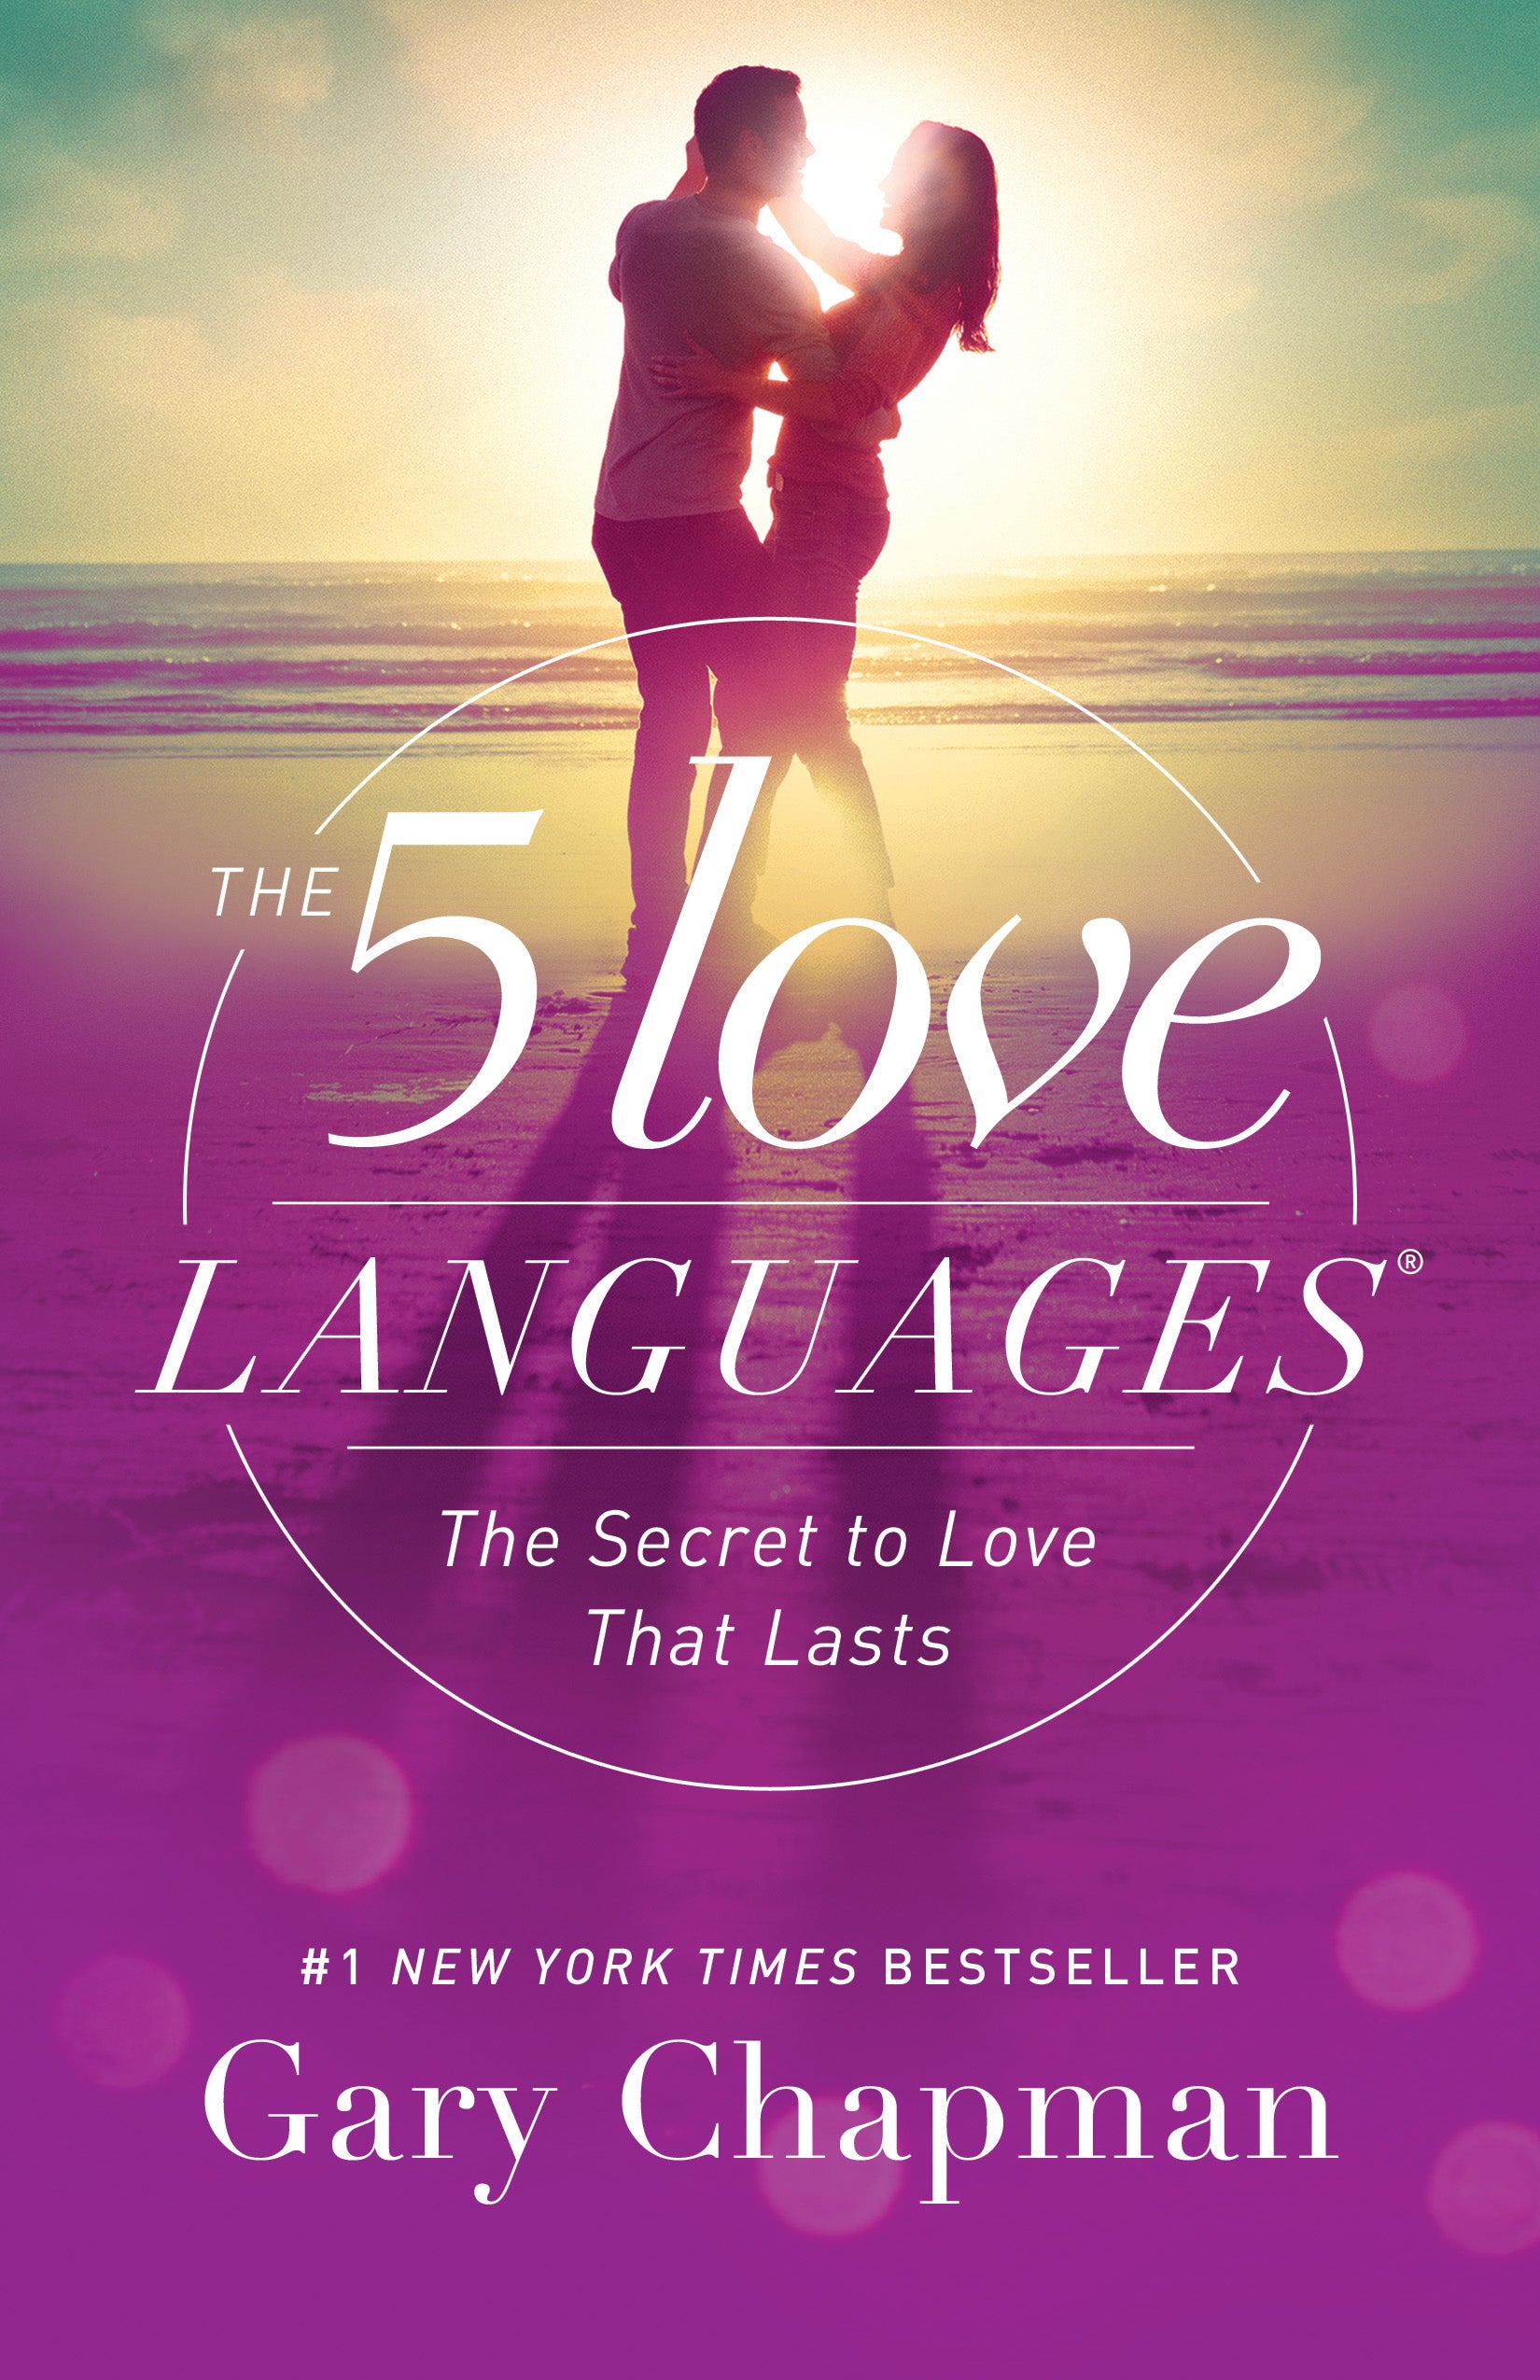 Image of The 5 Love Languages other